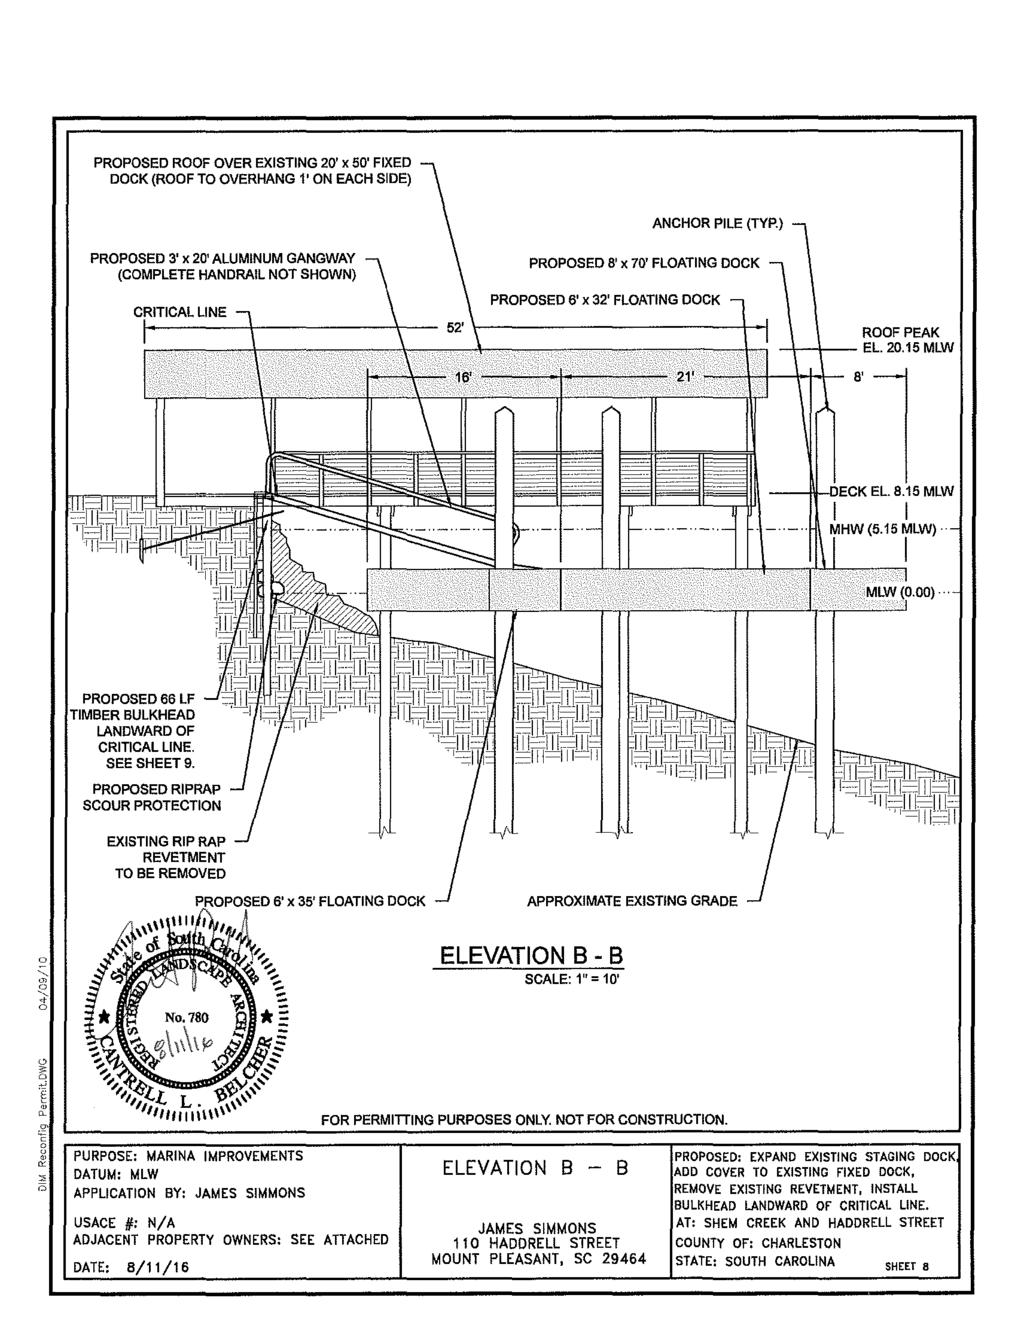 PROPOSED ROOF OVER EXISTING 2' x5' FIXED DOCK (ROOF TO OVERHANG 1' ON EACH SIDE) ANCHOR PILE (TYP.